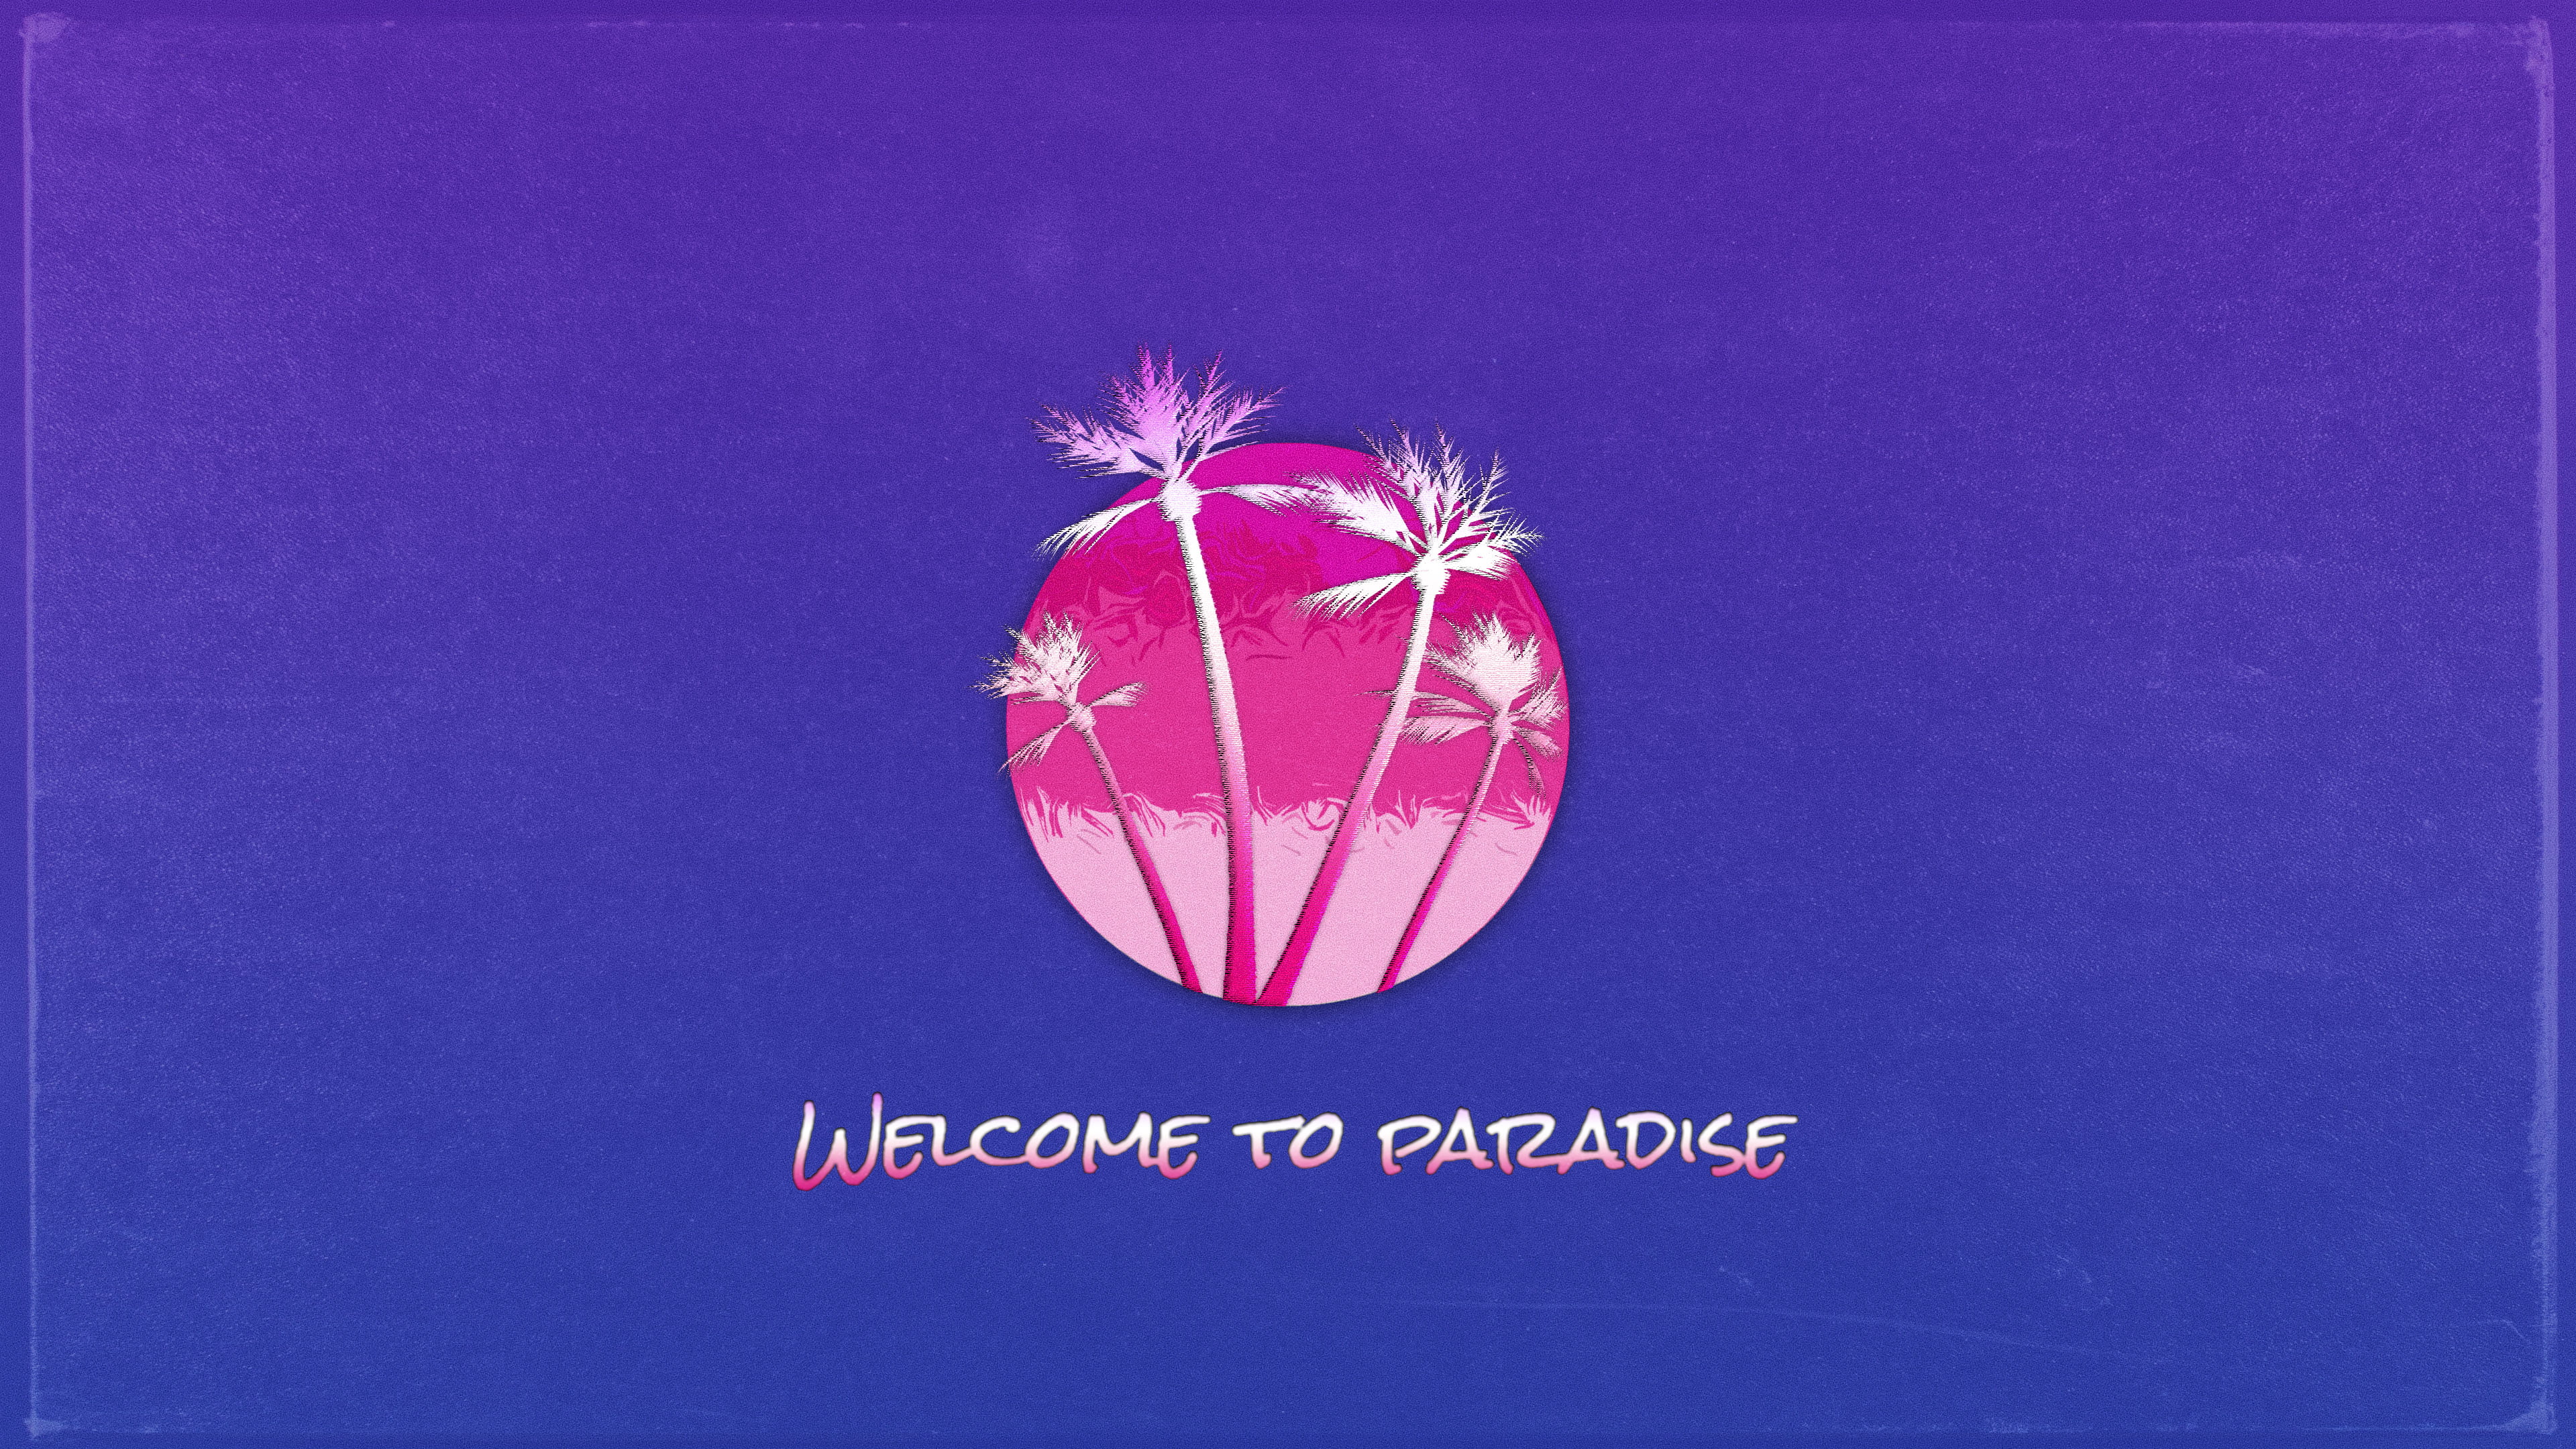 OutRun, sunset, vaporwave,  retrowave, text, video games, no people